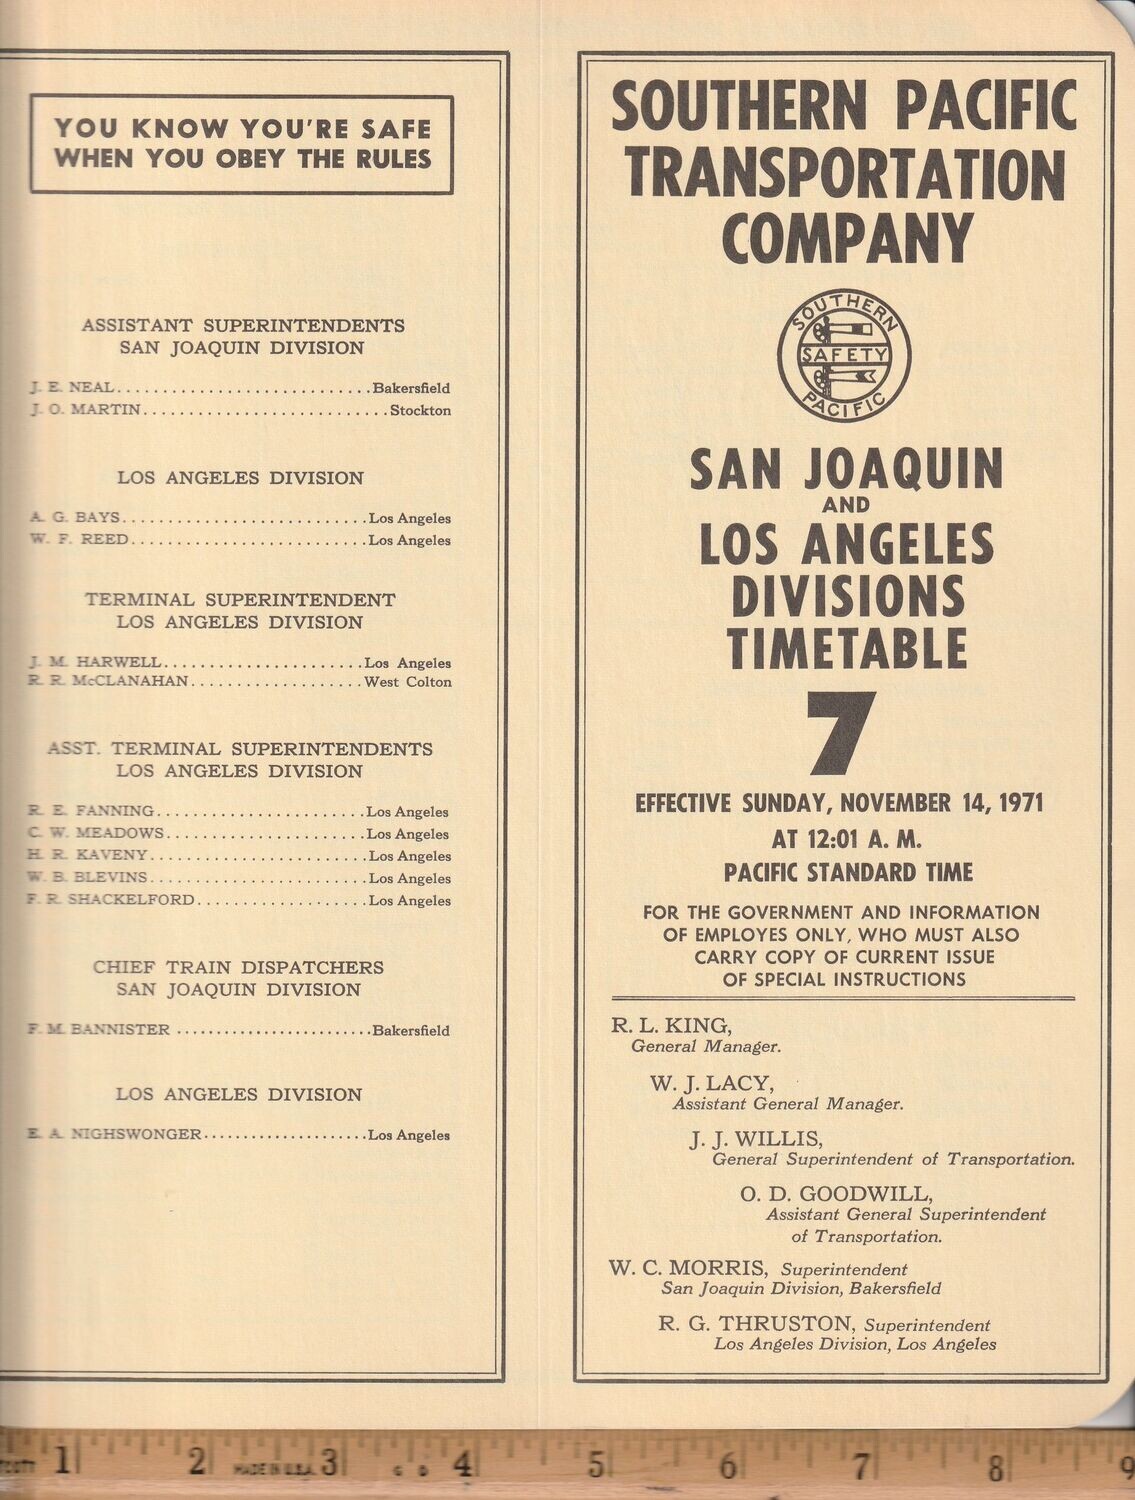 Southern Pacific San Joaquin and Los Angeles Divisions 1971